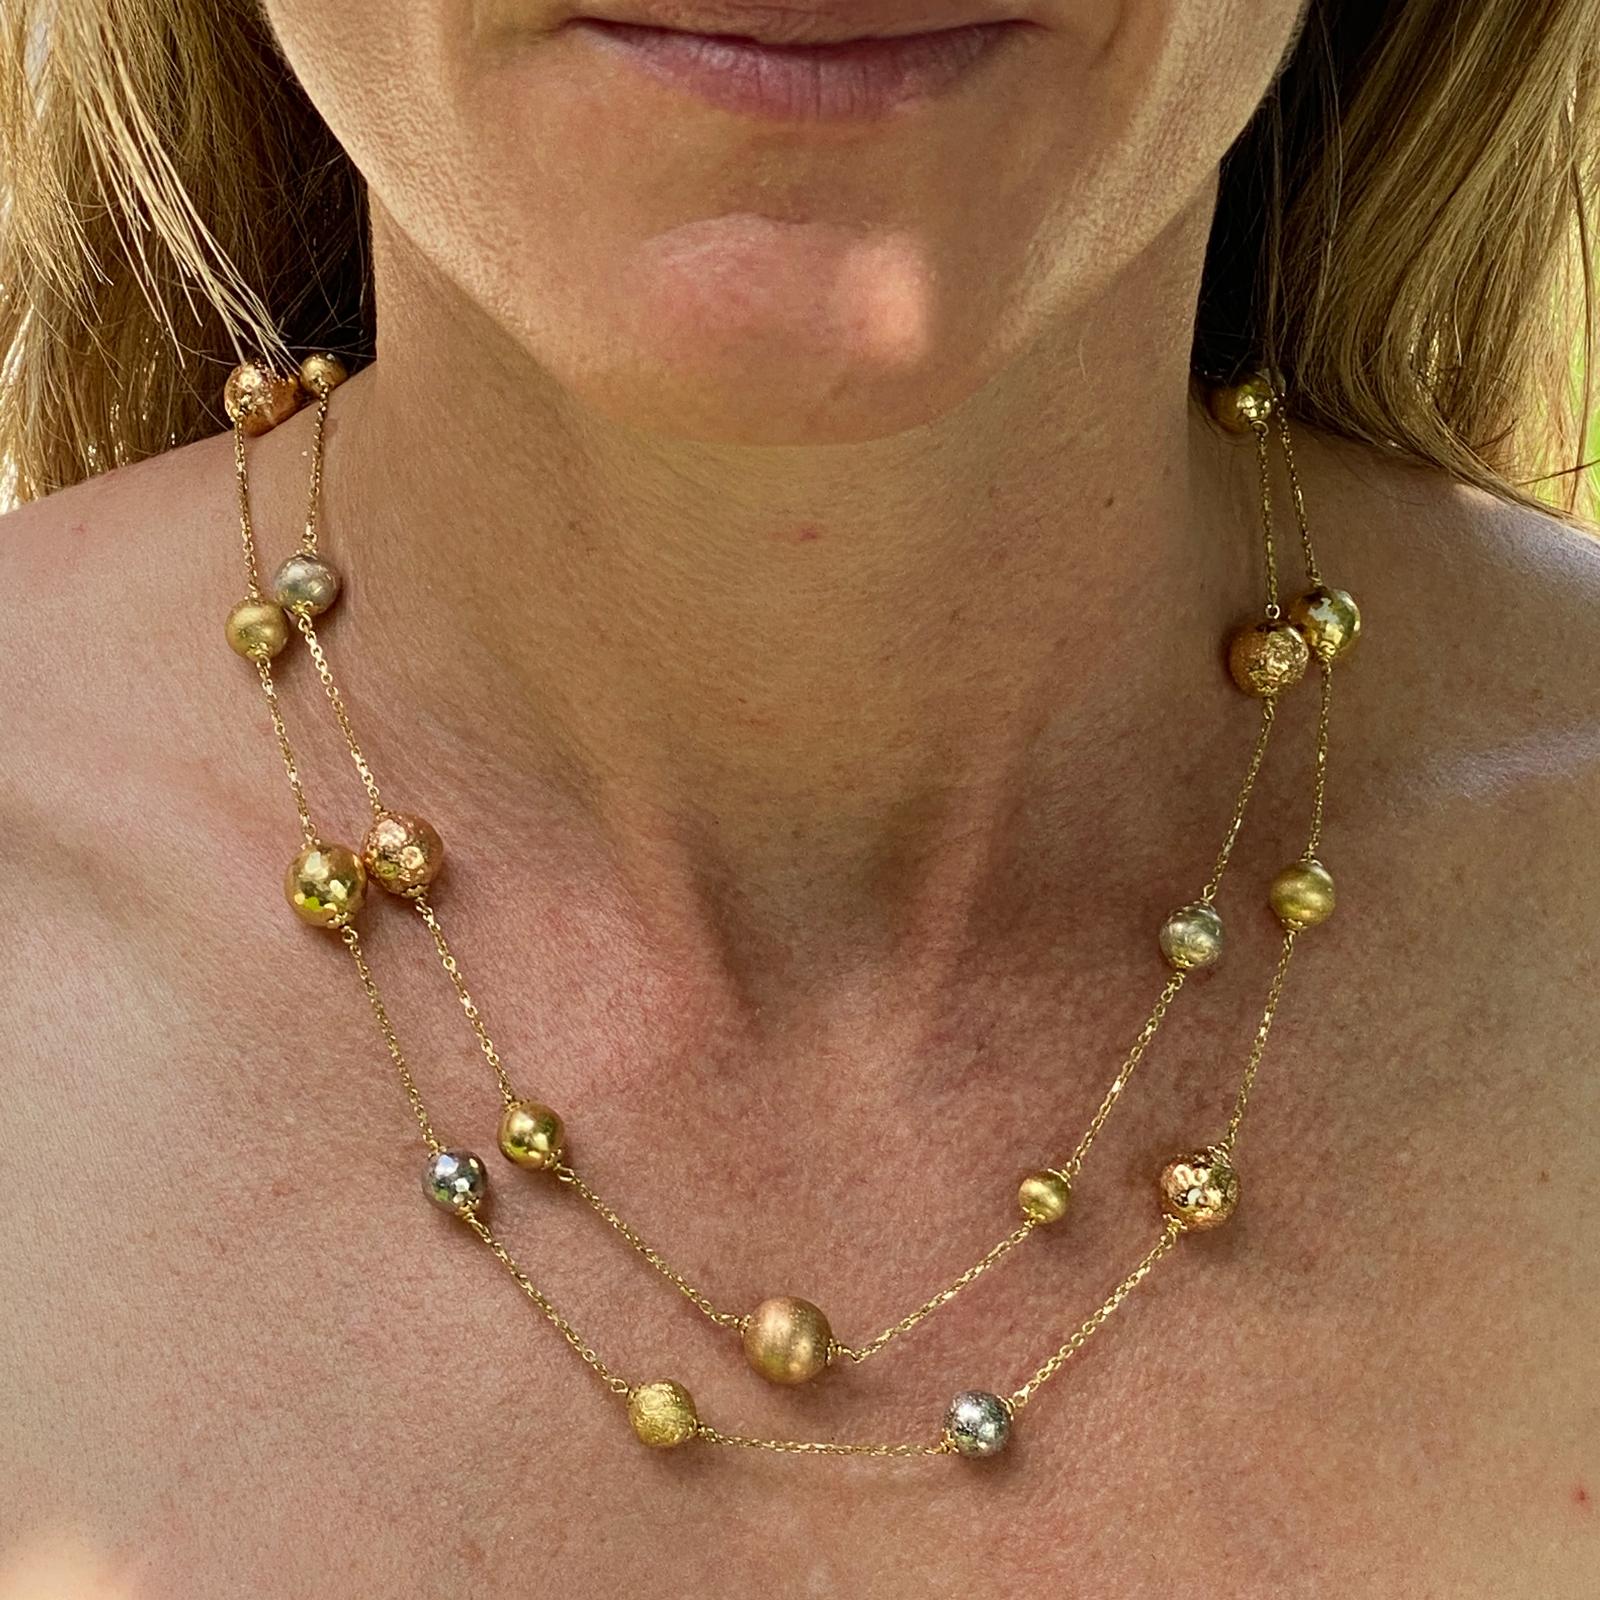 Modern two strand necklace fashioned in 18 white, yellow, and rose gold. The necklace features high polilsh and satin finish textured gold balls, and measures 18 inches in length (one strand is slightly longer). Great classic staple that matches